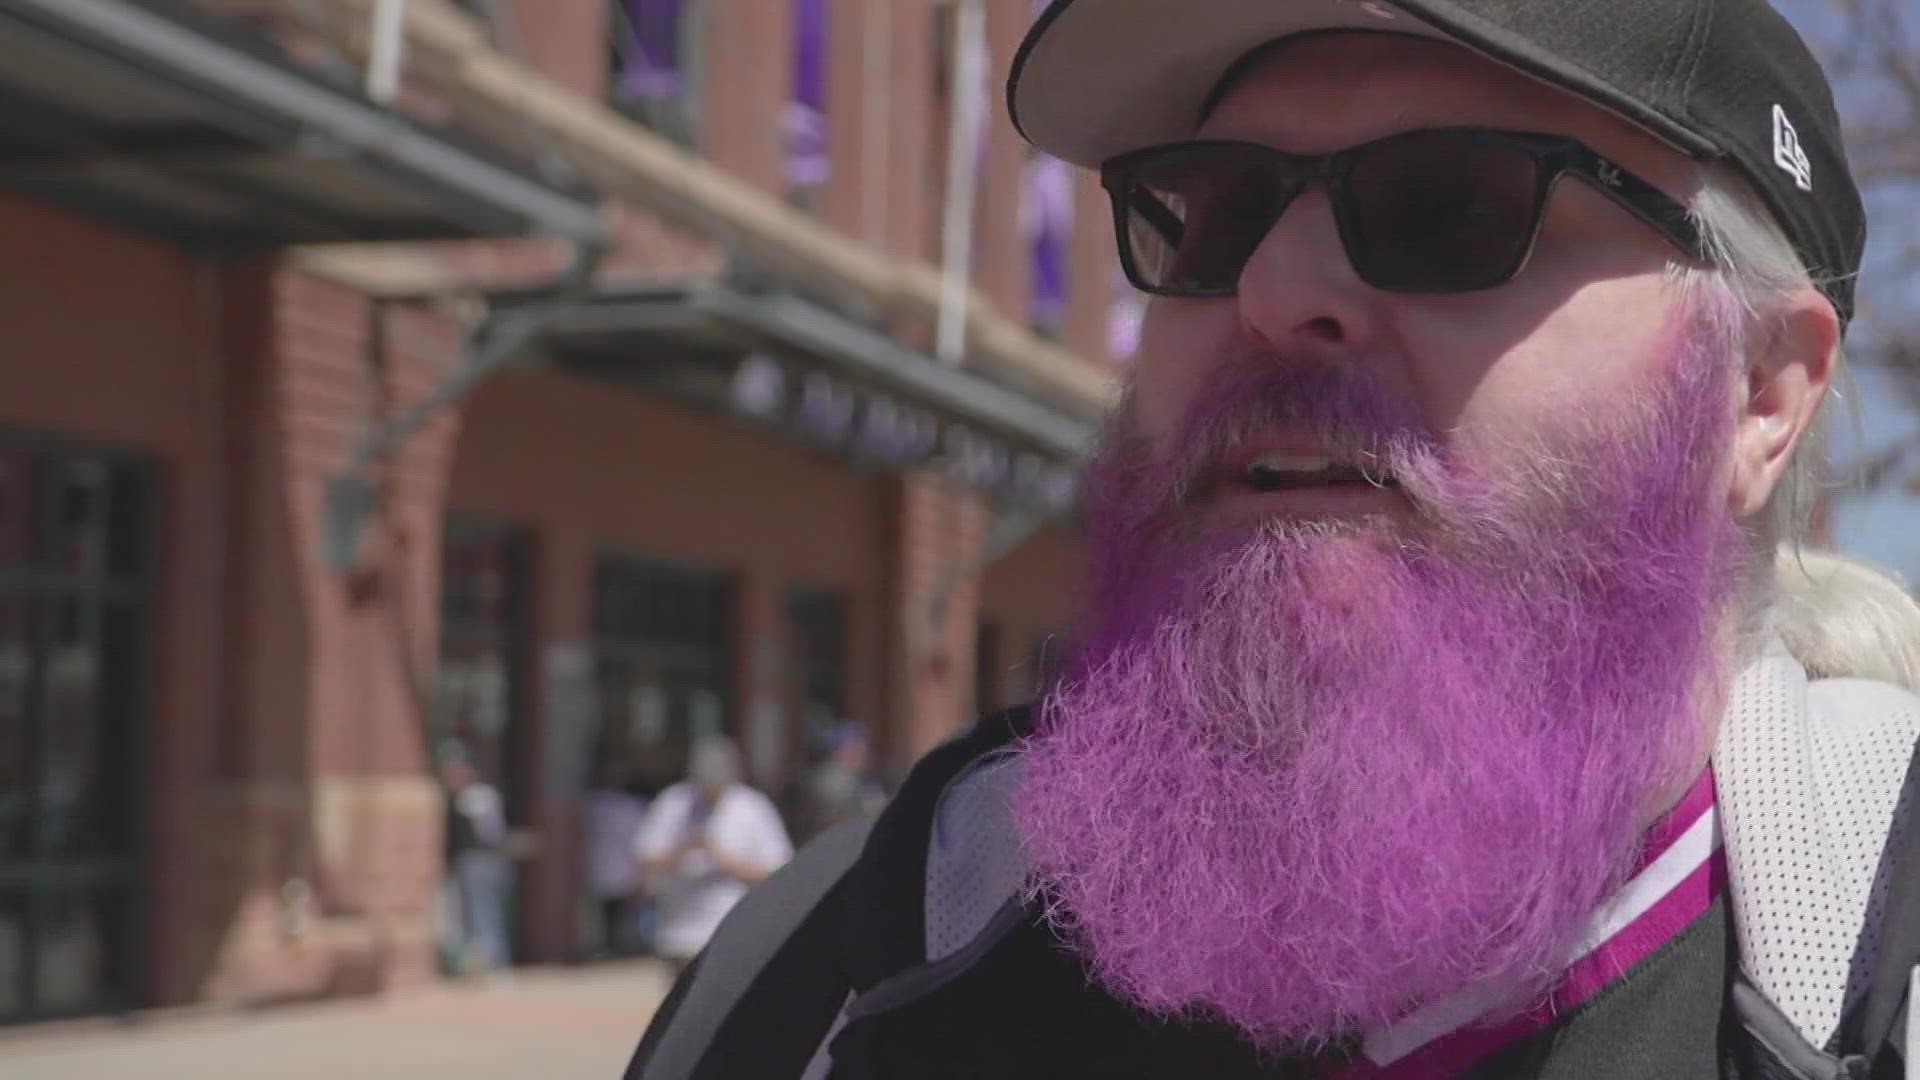 After 3 years, Opening Day is back and downtown Denver is alive with baseball fans. Reporter Noel Brennan covers the sports festivities.